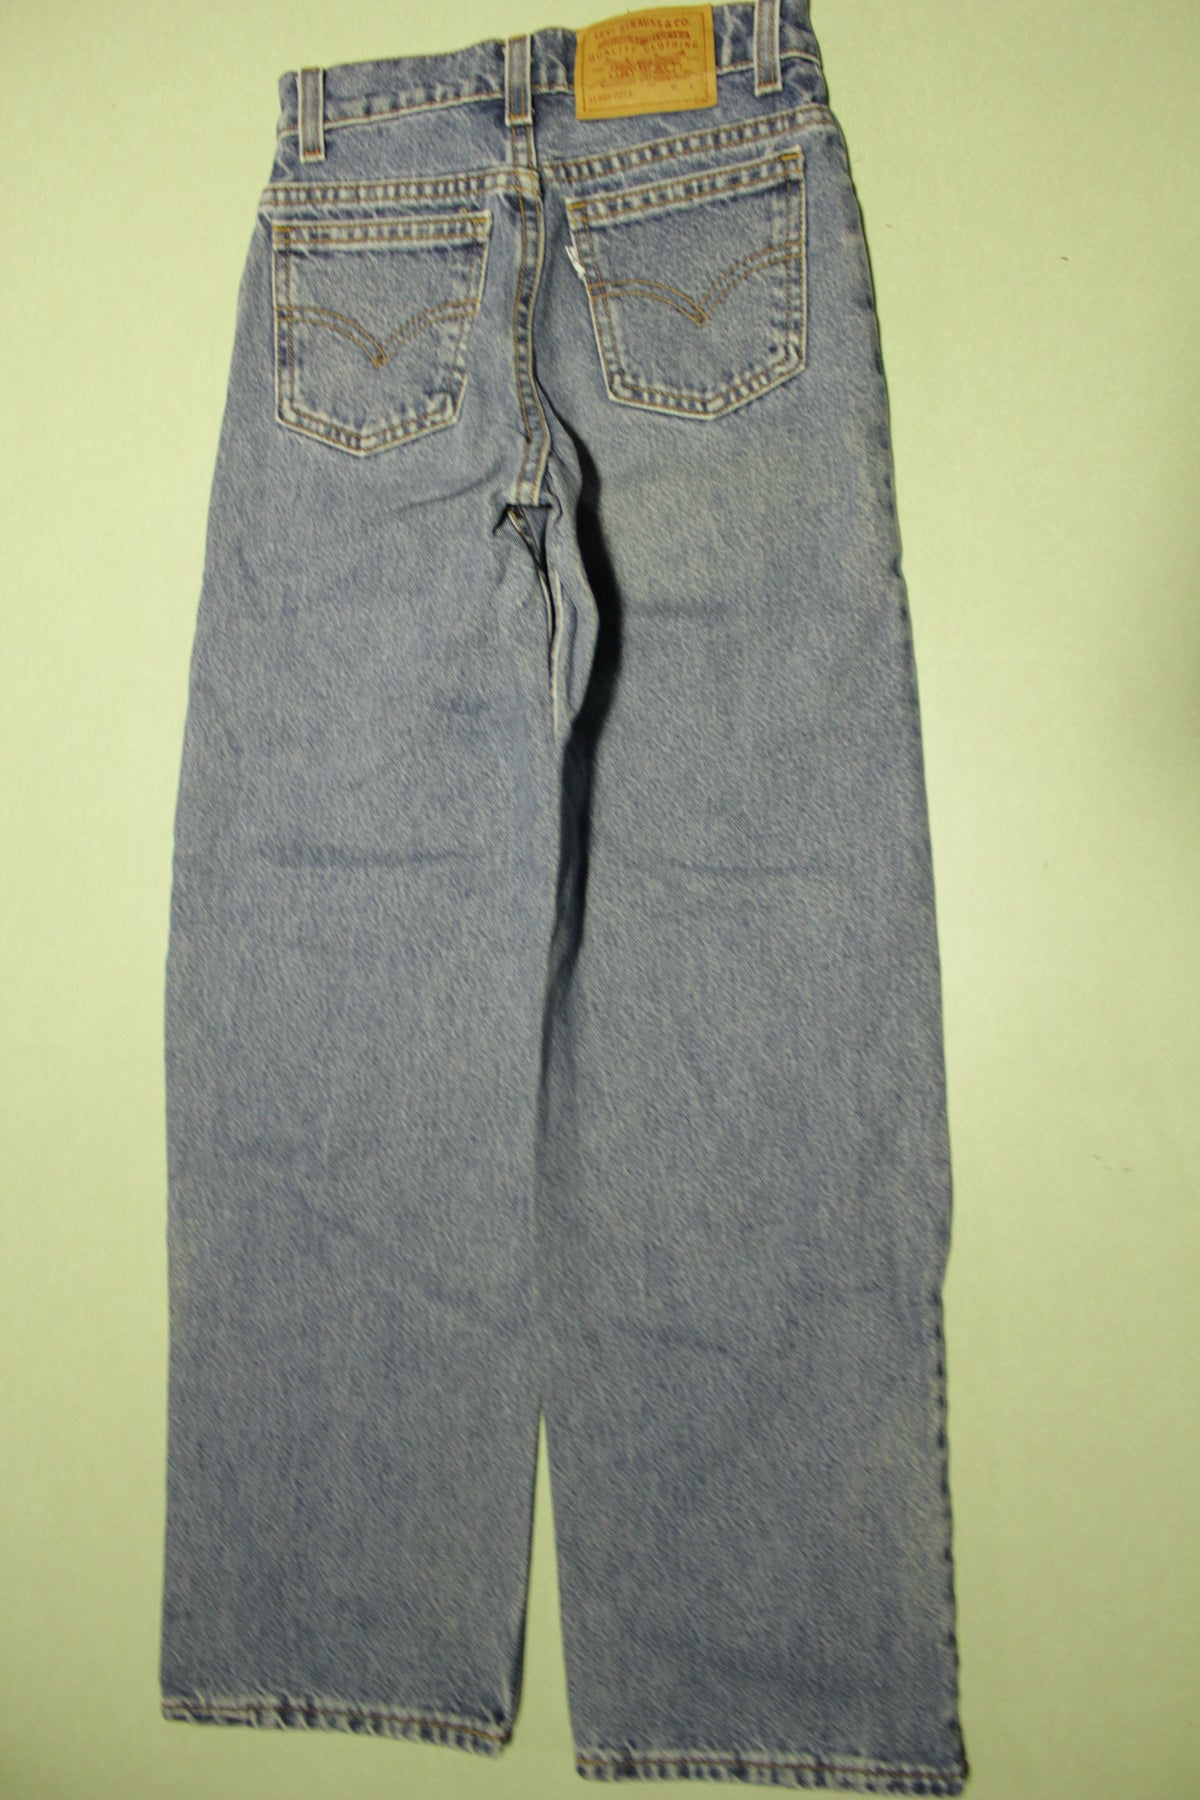 Levis 90s 501 31465 0214 Jeans. Vintage Grunge Punk Made in USA 24x27